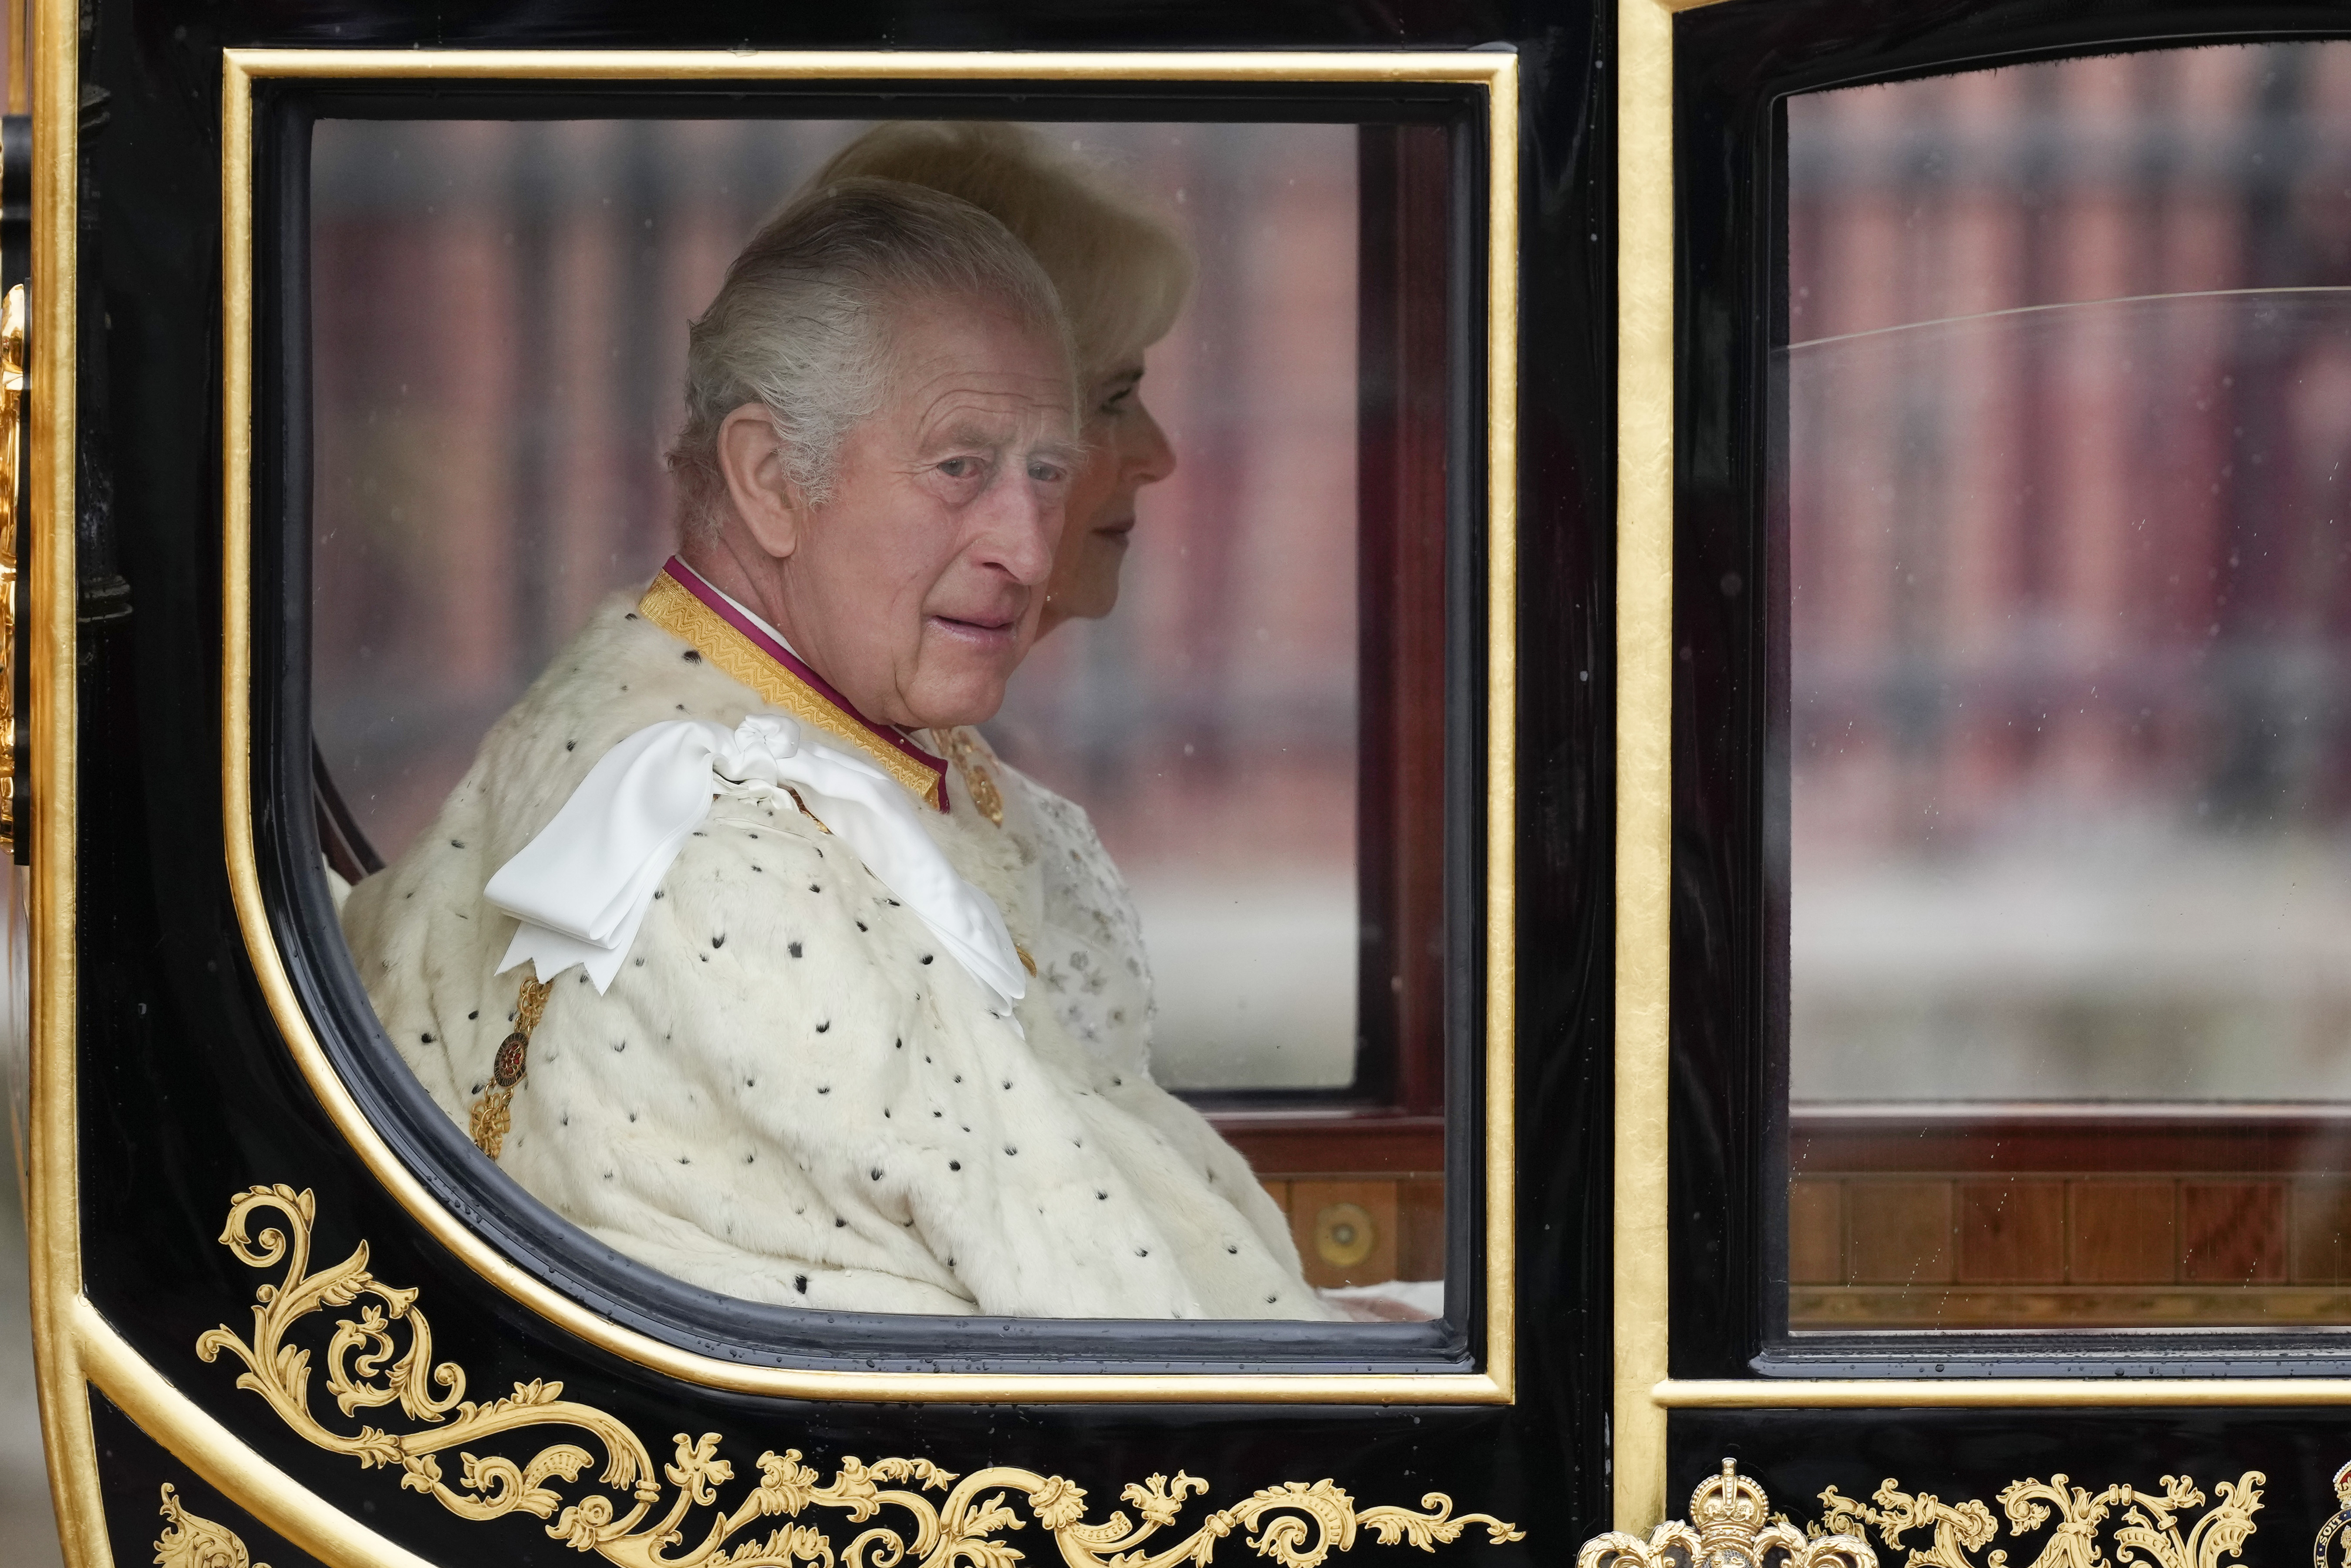 King Charles III and Camilla, Queen Consort, on their way to commemorate the 60th anniversary of the reign of Queen Elizabeth II at Buckingham Palace in London, England on May 6, 2023. | Source: Getty Images